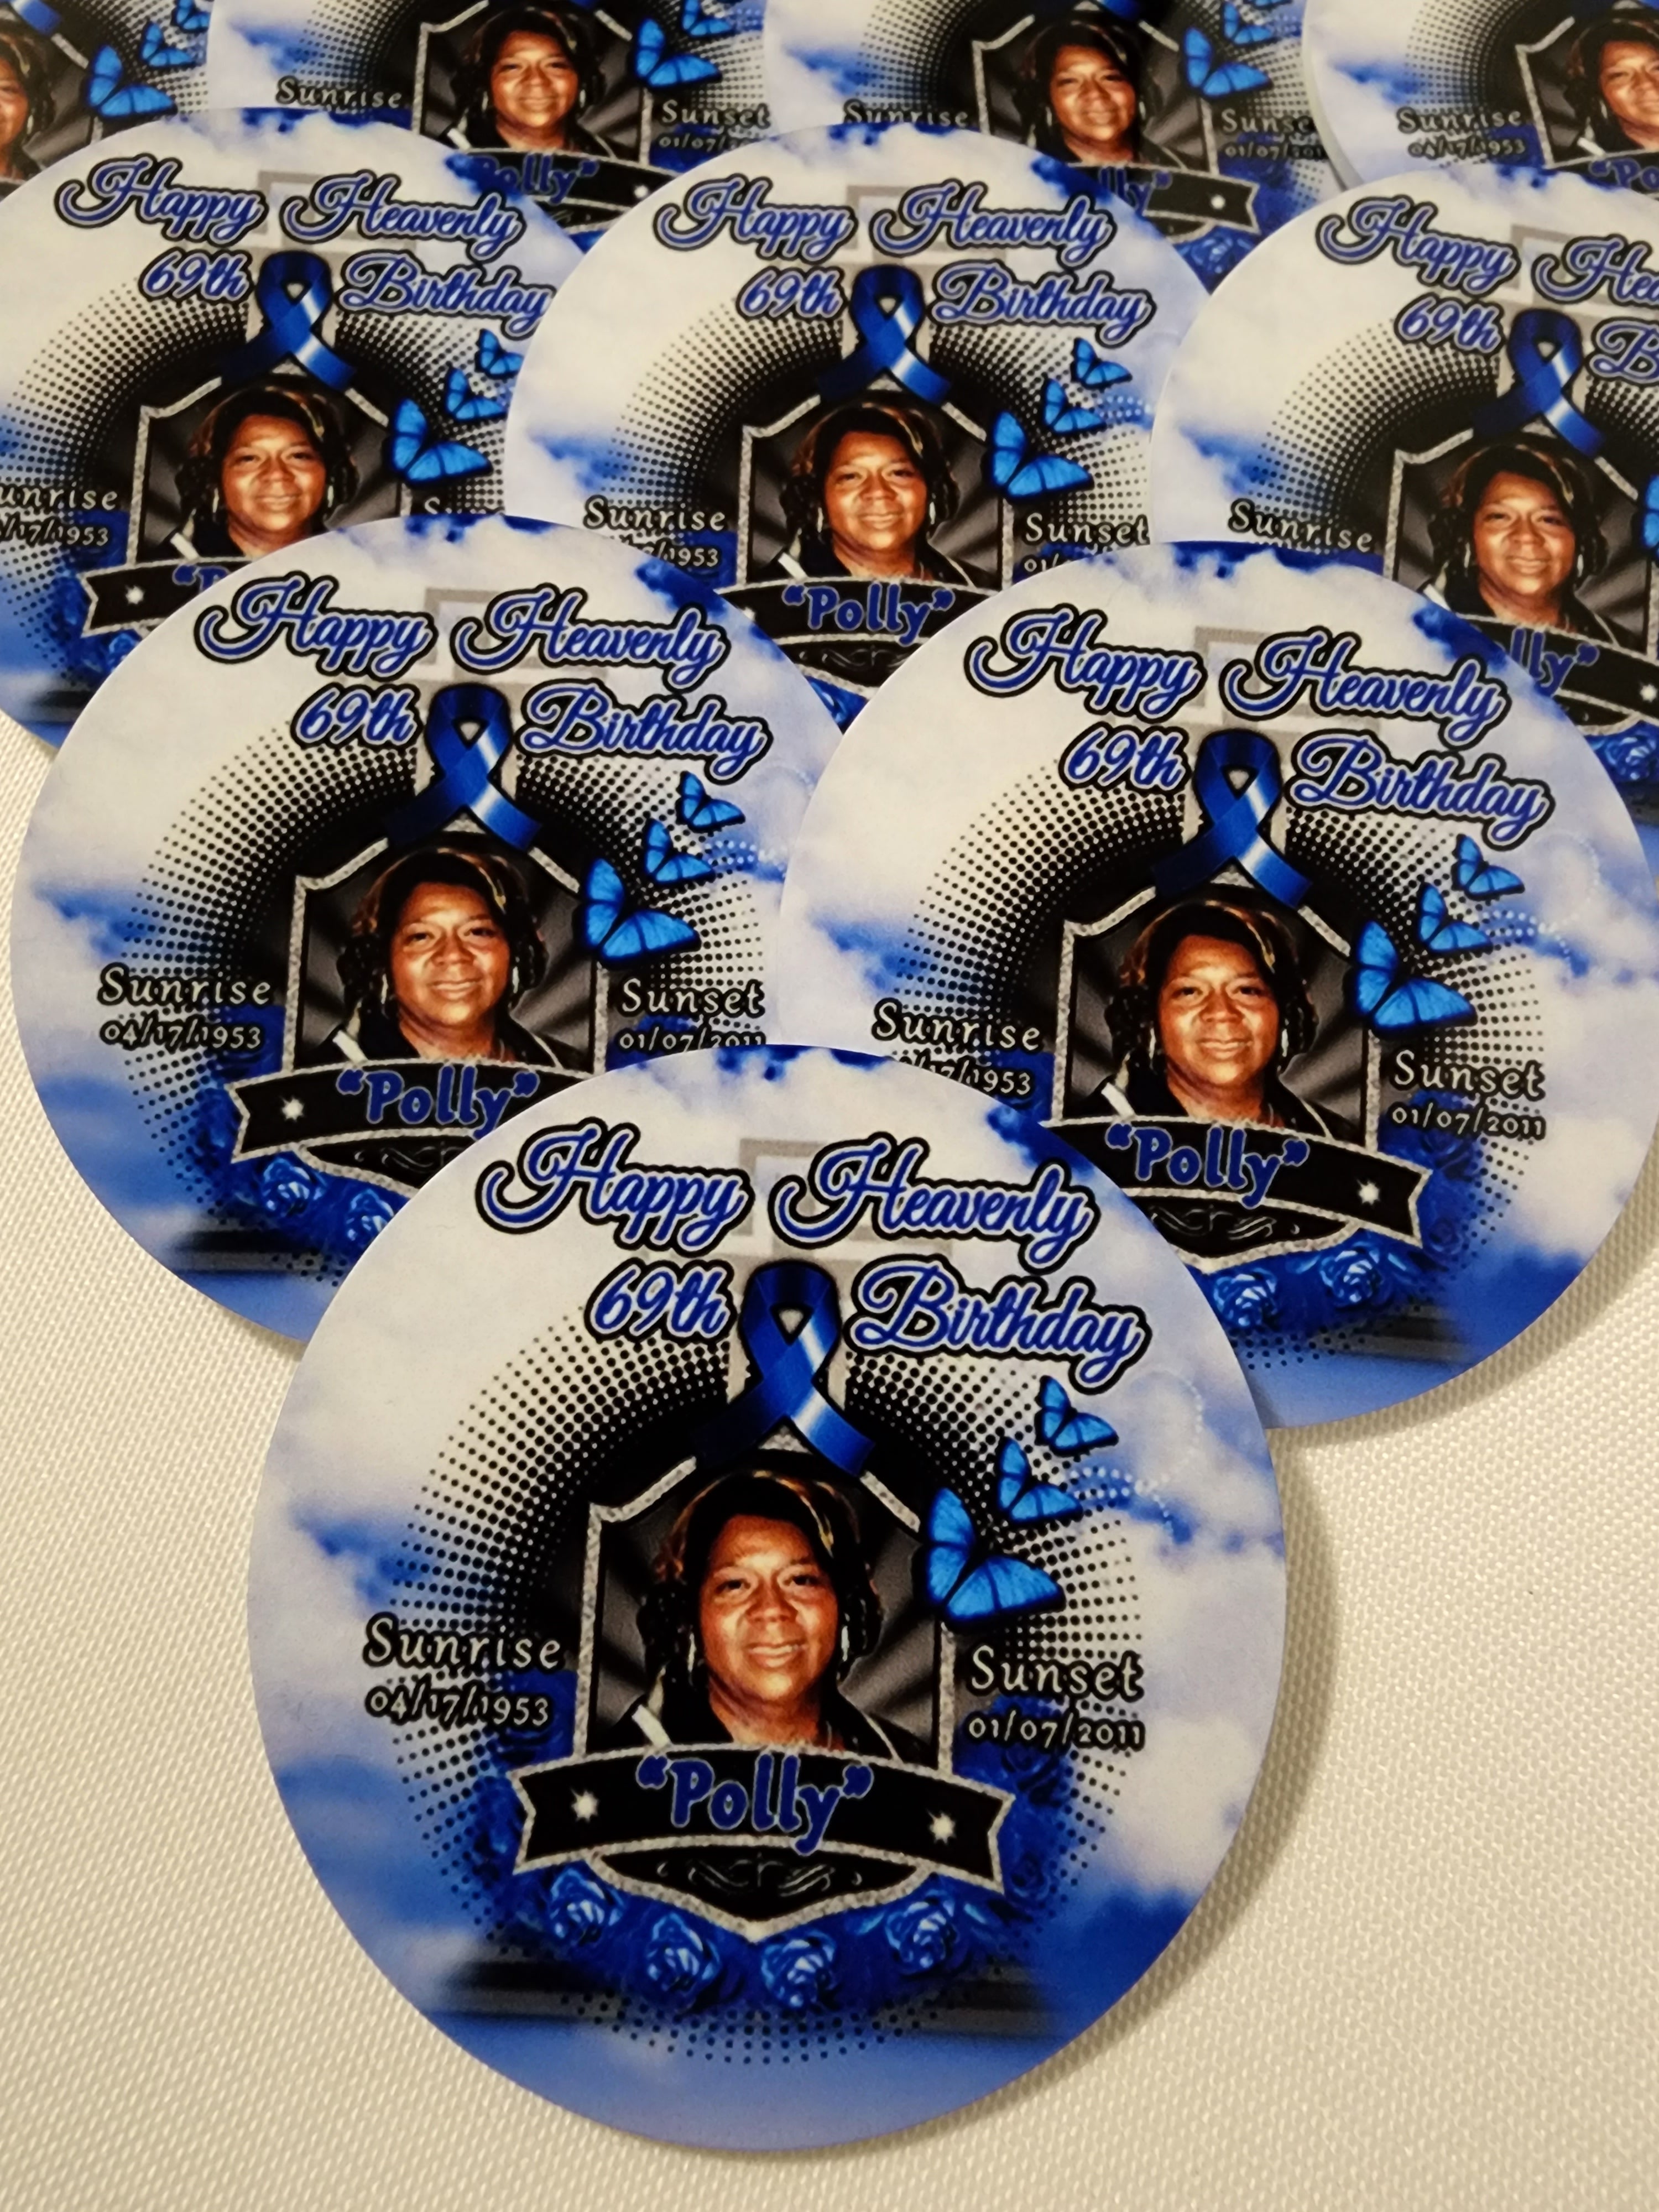 Customized Grad Sublimation Buttons/Pins